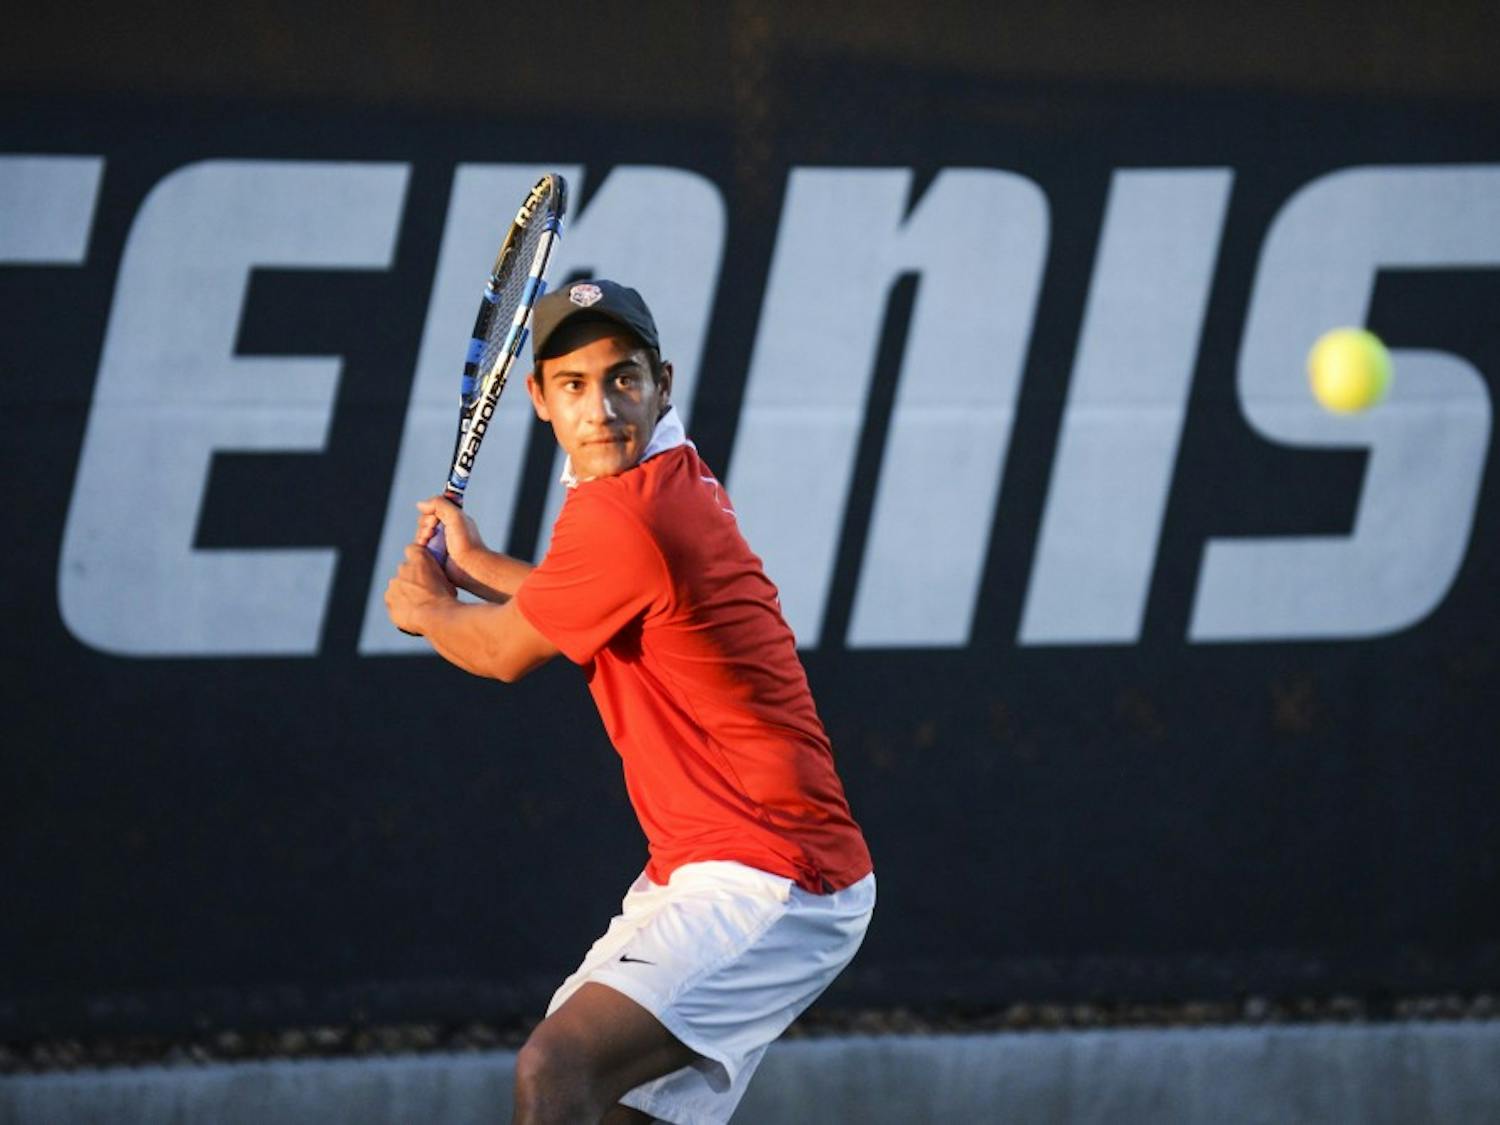 Junior Jorge Escutia eyes the ball during a match Friday, Feb. 26, 2016 at the McKinnon Family Tennis Stadium. The Lobos lost to both Texas Tech and Arizona this past Saturday in Lake Nona, Florida.